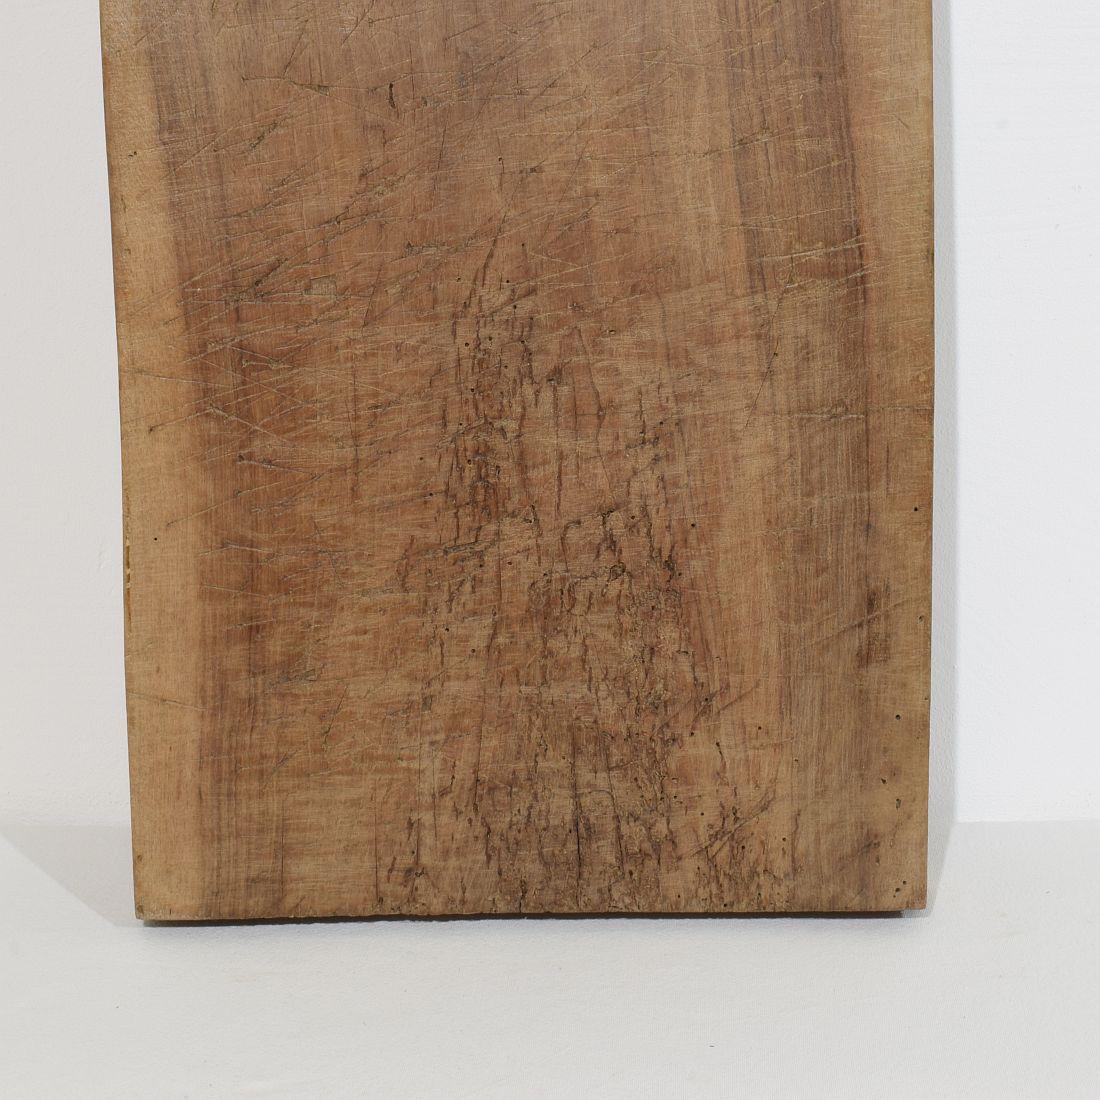 French 19th Century, Thick Wooden Chopping or Cutting Board 4